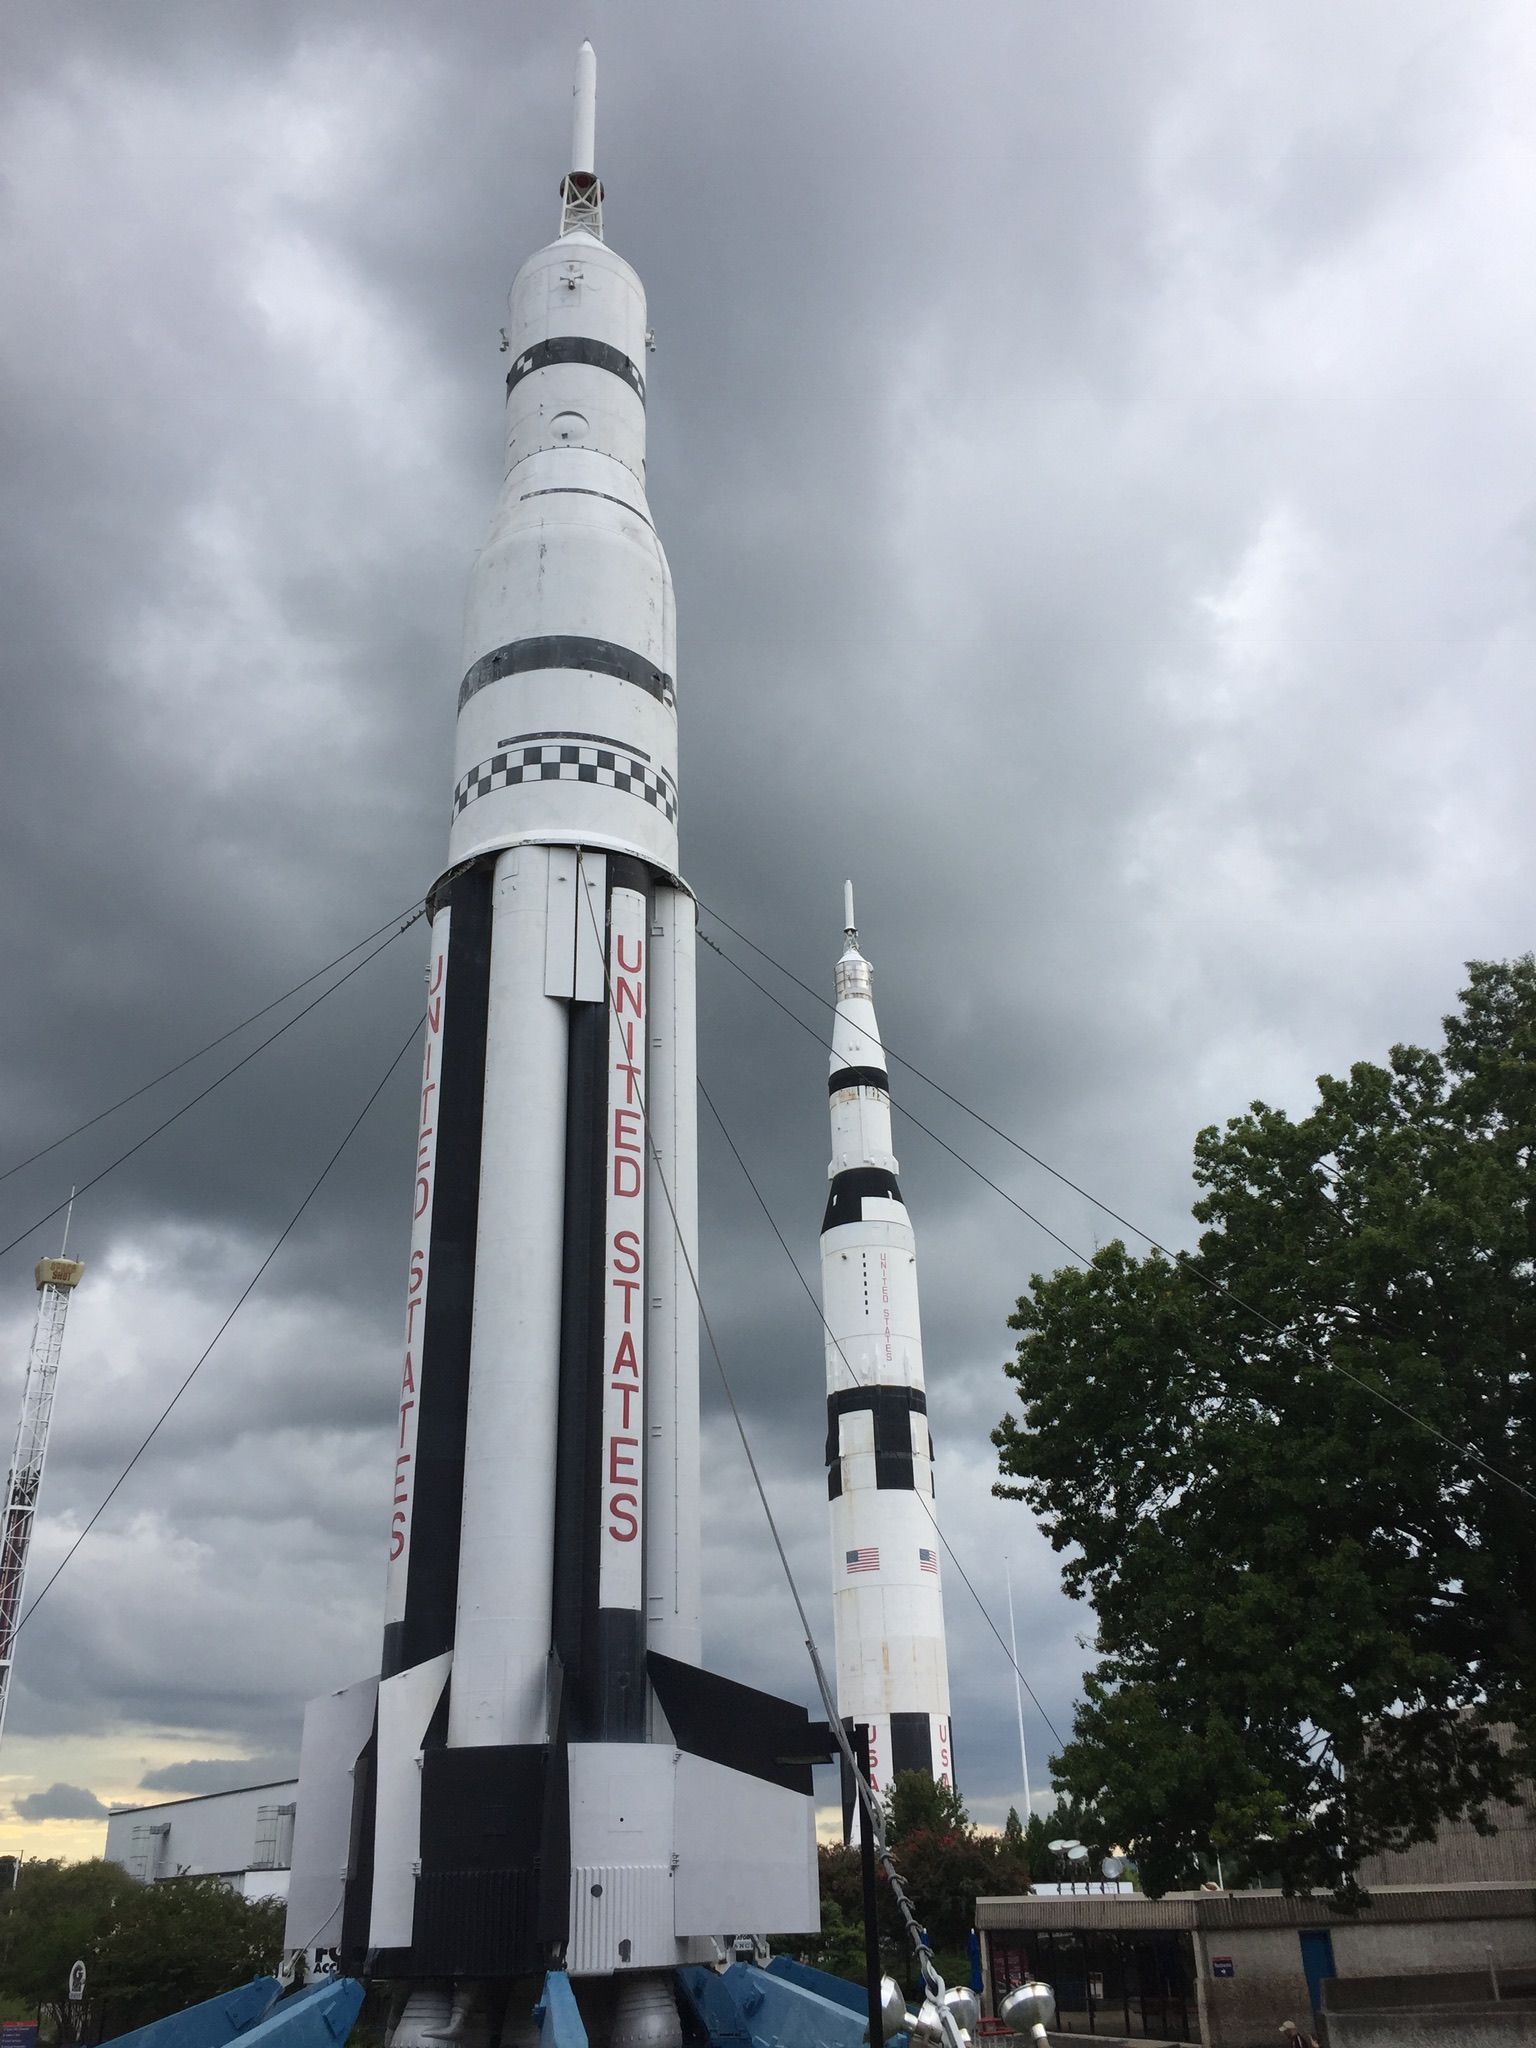 Travel To The Huntsville Rocket And Space Museum Steemit